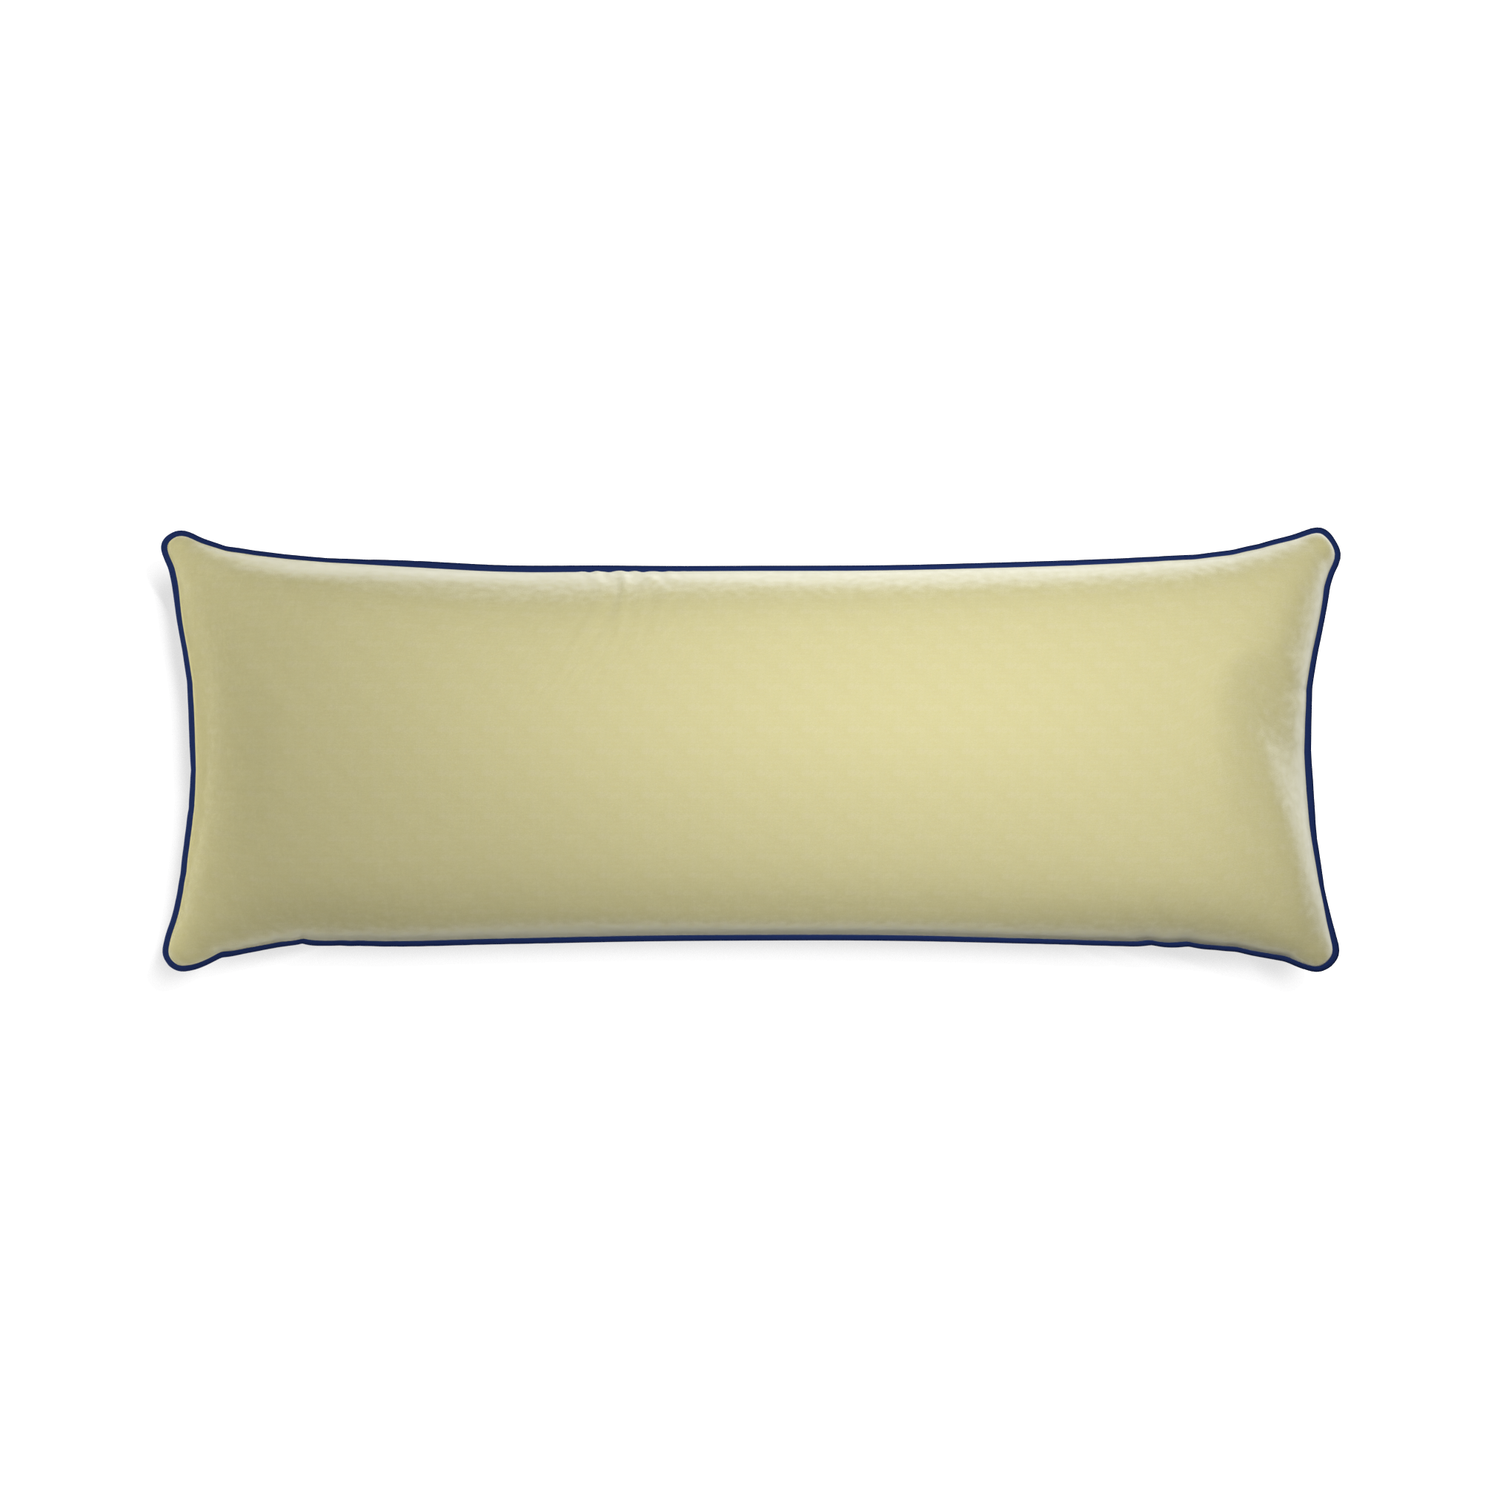 Xl-lumbar pear velvet custom pillow with midnight piping on white background